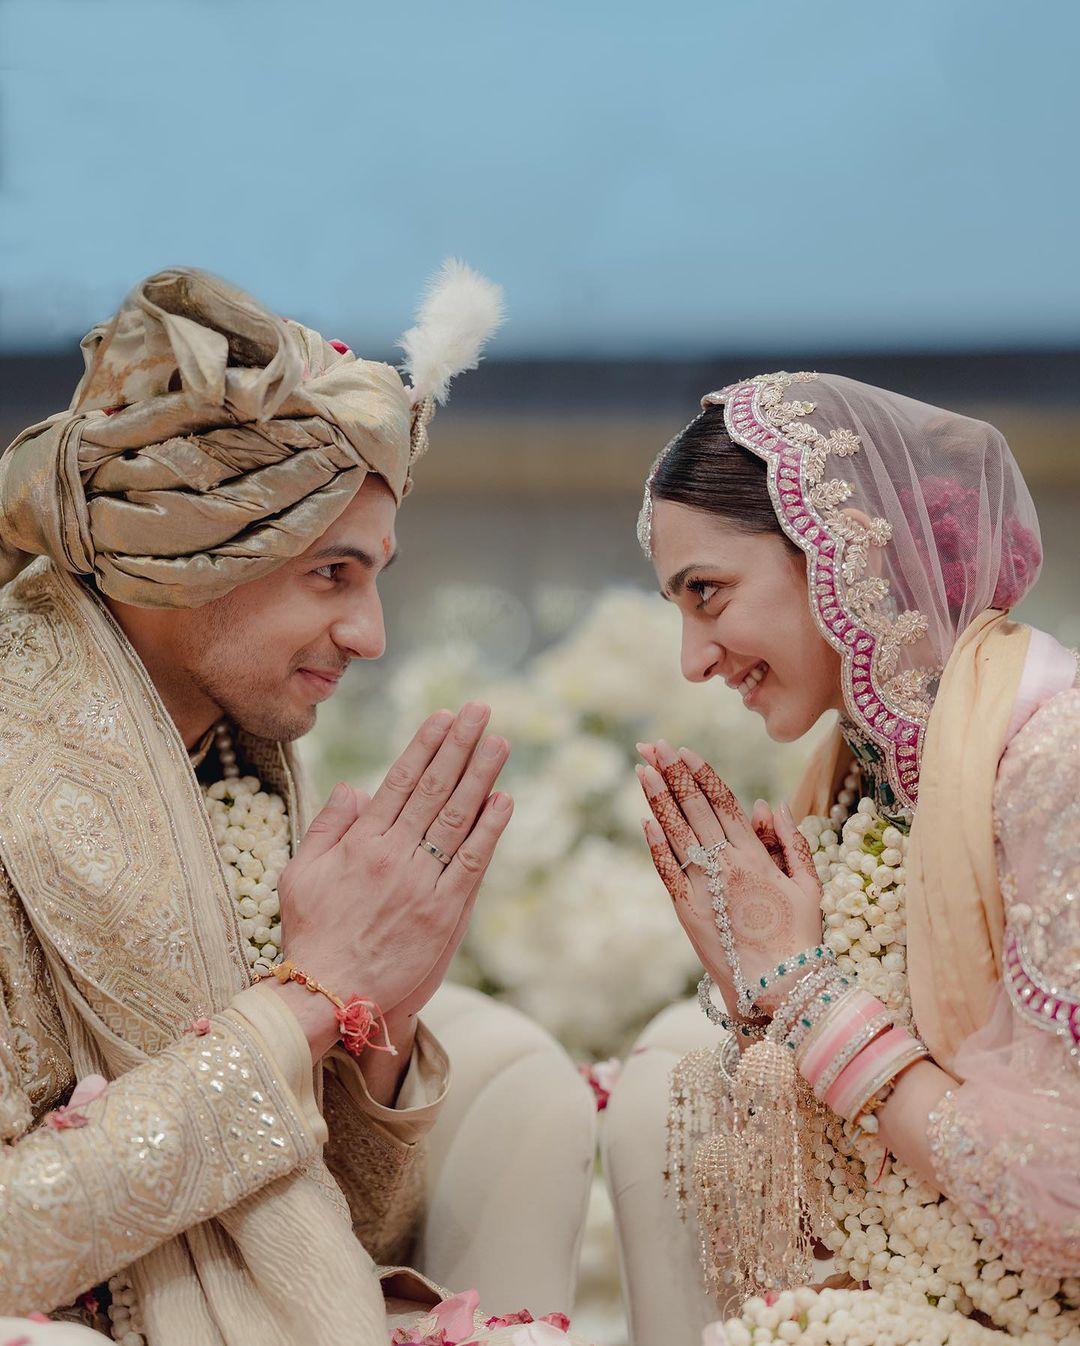 Taking to Instagram, Sidharth and Kiara shared the first pictures of their wedding in which they look like a regal couple.